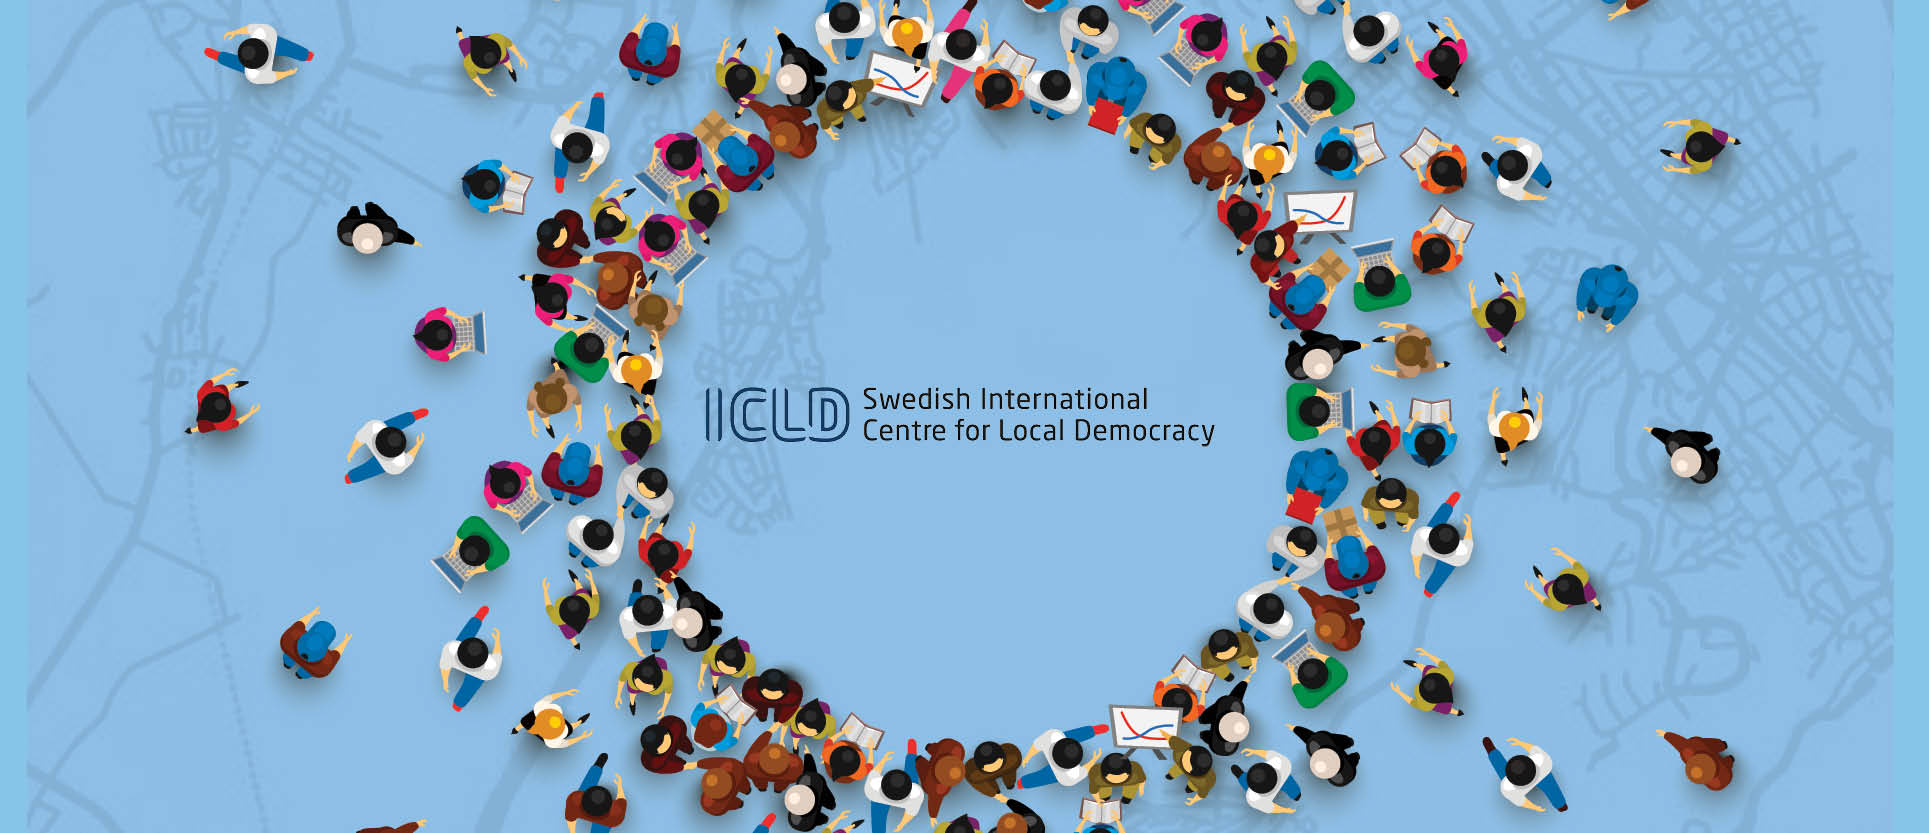 The Swedish International Centre for Local Democracy: bringing people and politics together